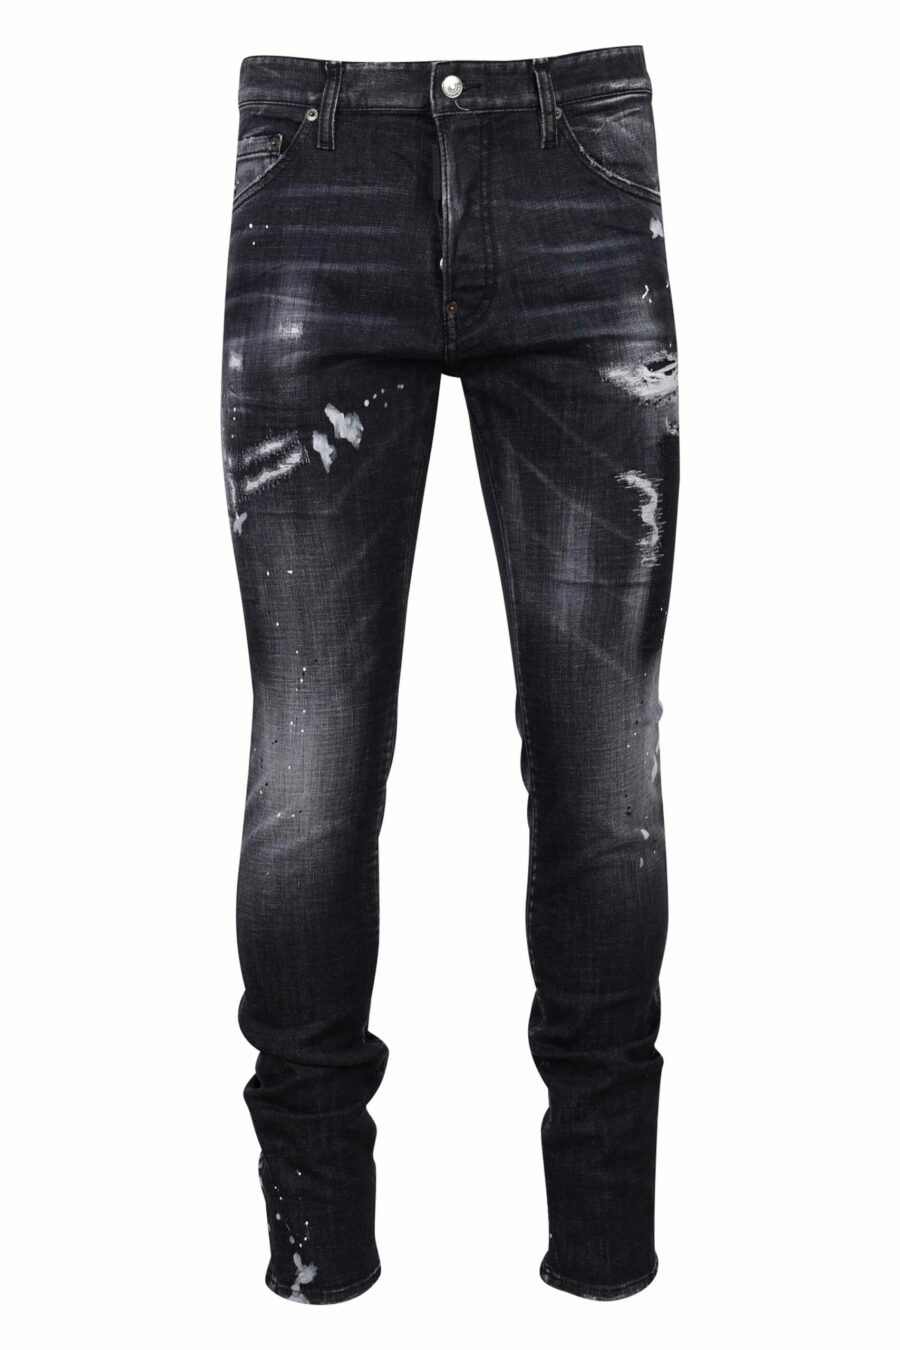 Black "cool guy jean" jeans with rips and frayed - 8054148300753 scaled